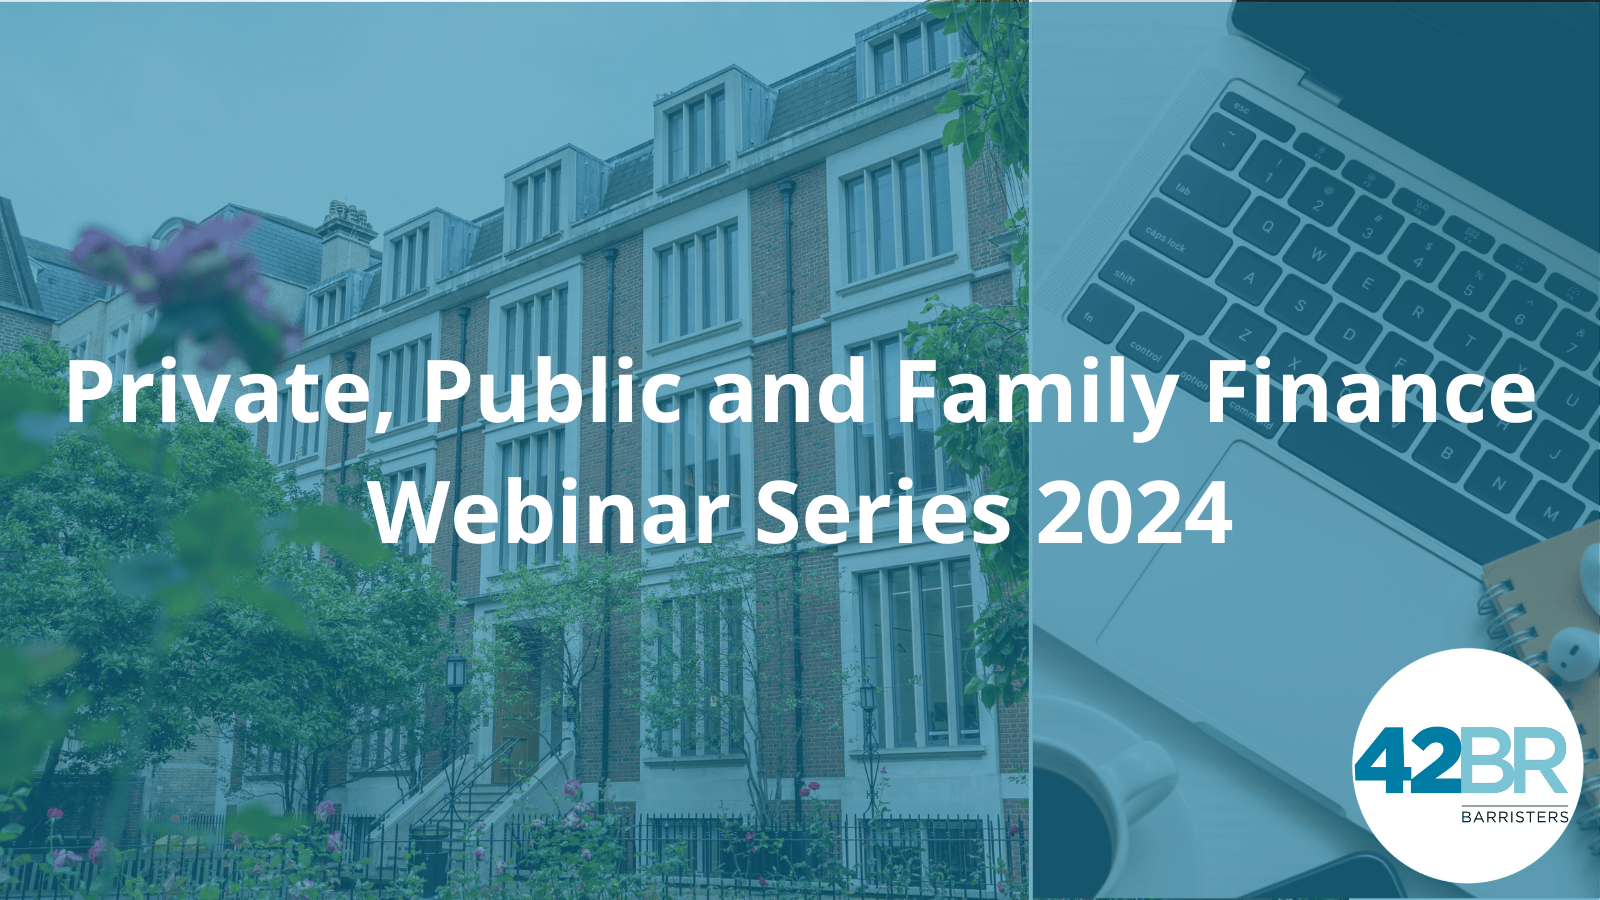 Private, Public and Family Finance Webinar Series 2024